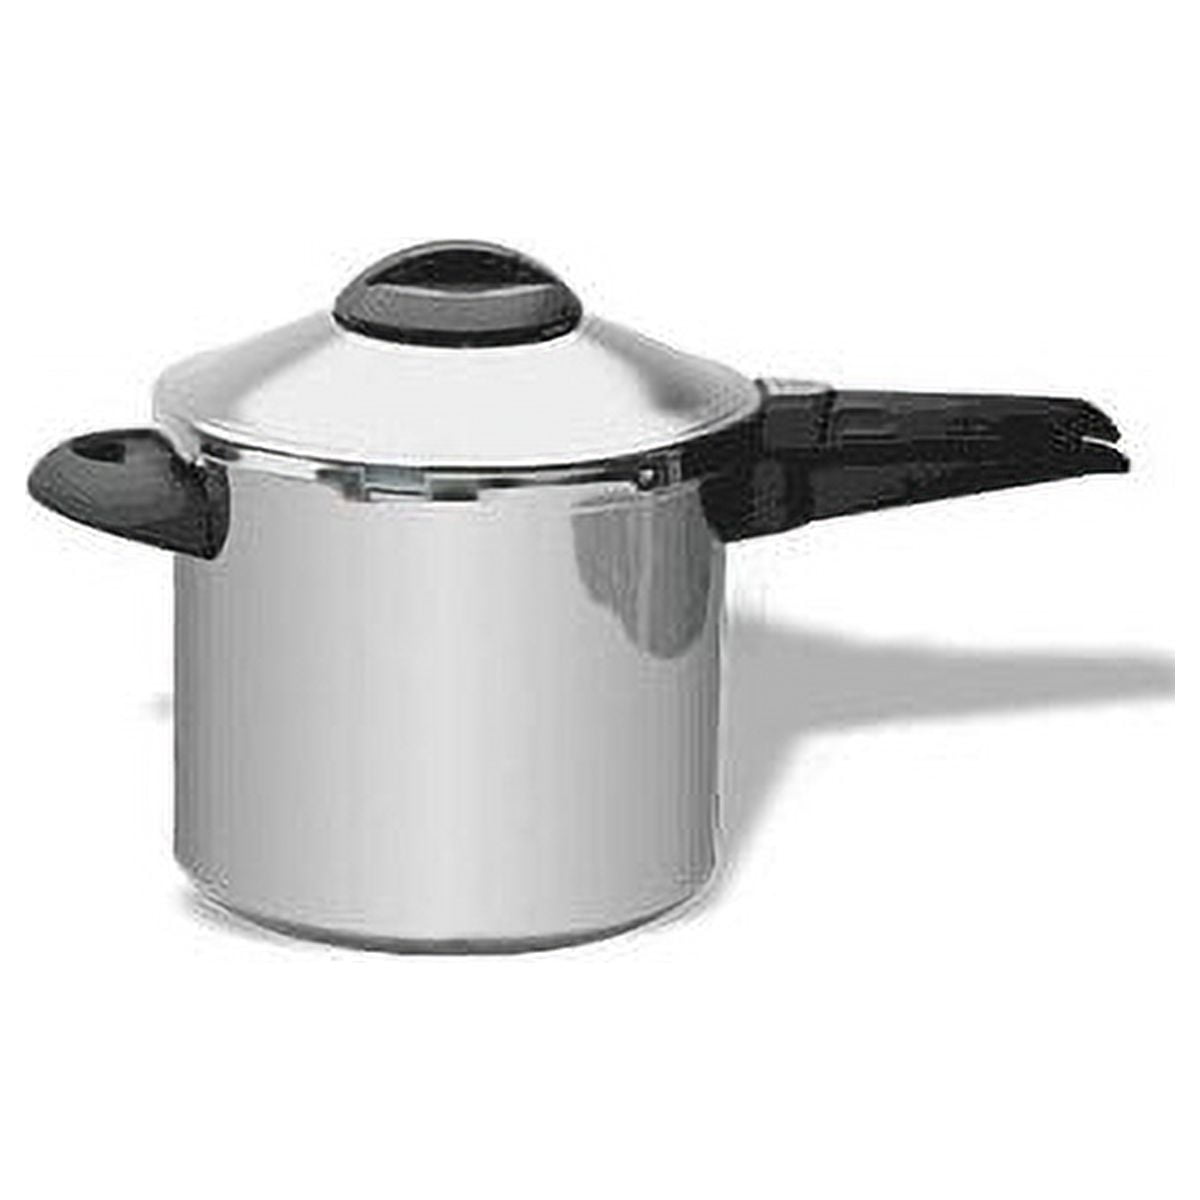  Kuhn Rikon DUROMATIC® Pressure Cooker 8.75” 6.3 qt family of 4  with side handles to save space: Home & Kitchen